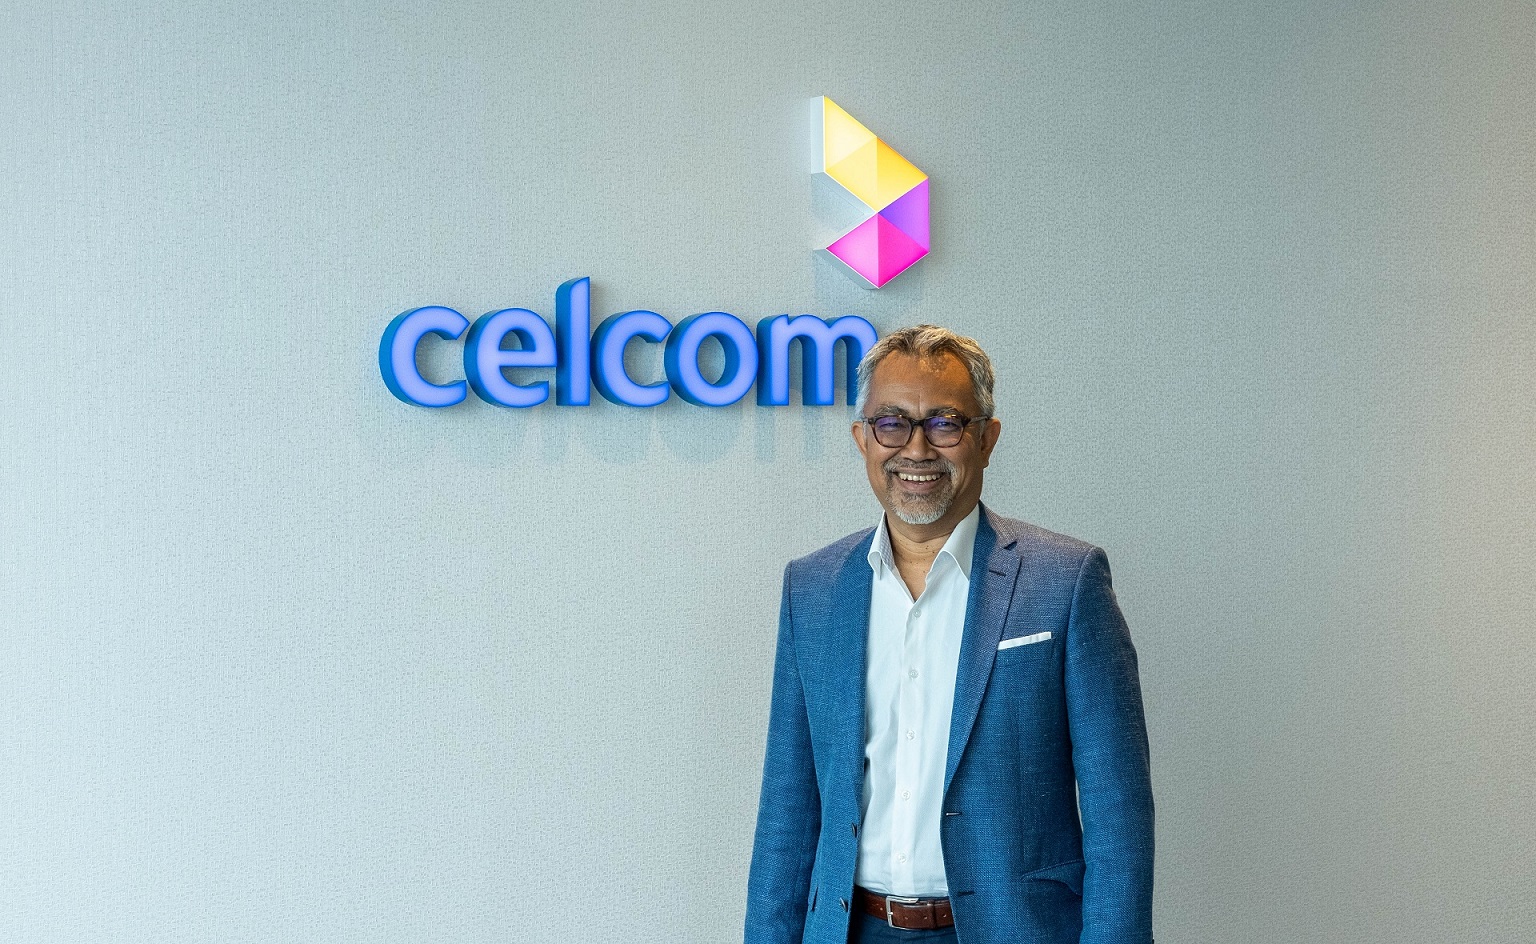 Following Maxis lead, Celcom becomes latest mobile operator in Malaysia to make cloud, managed services play via acquisition of Infront Consulting